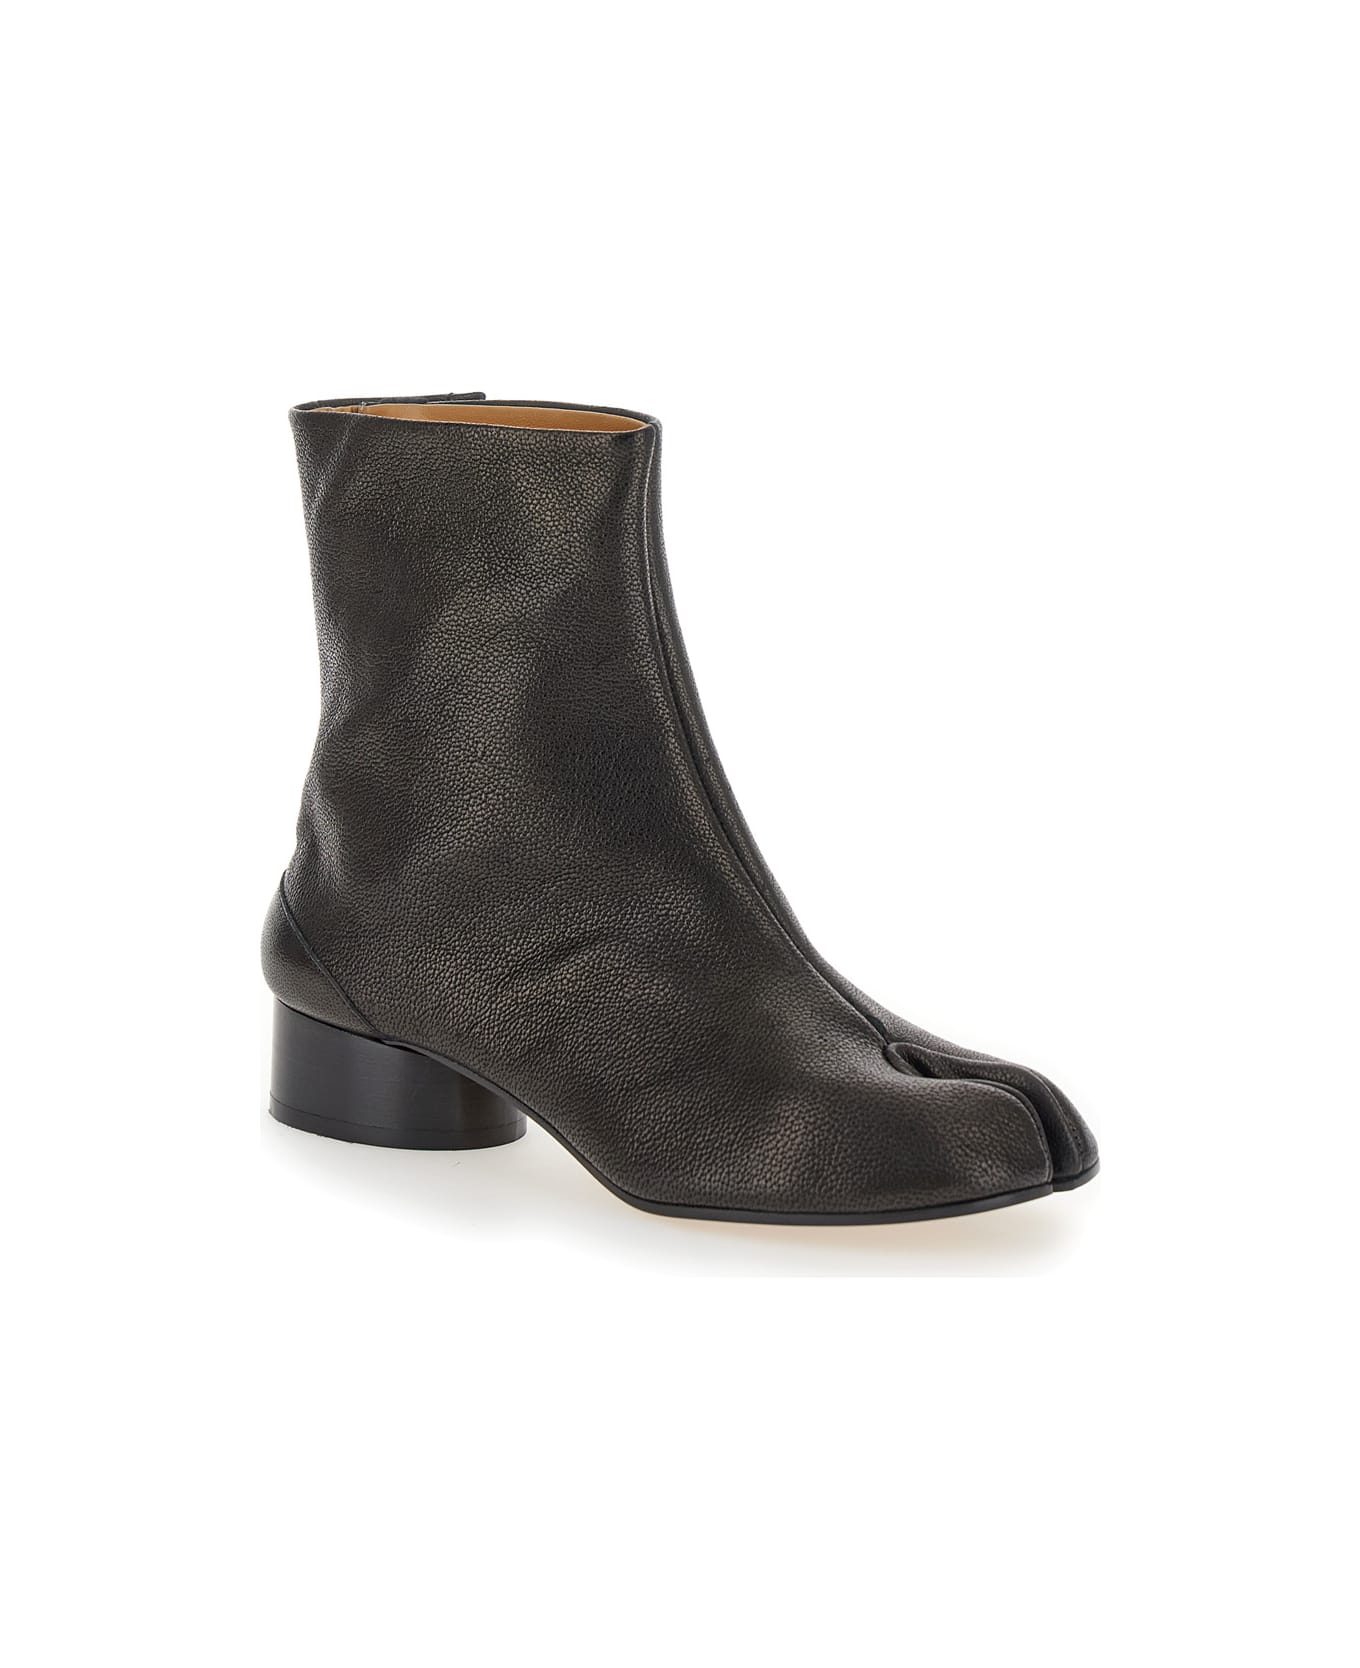 Maison Margiela 'tabi' Black Ankle Boots In Leather Woman - Black